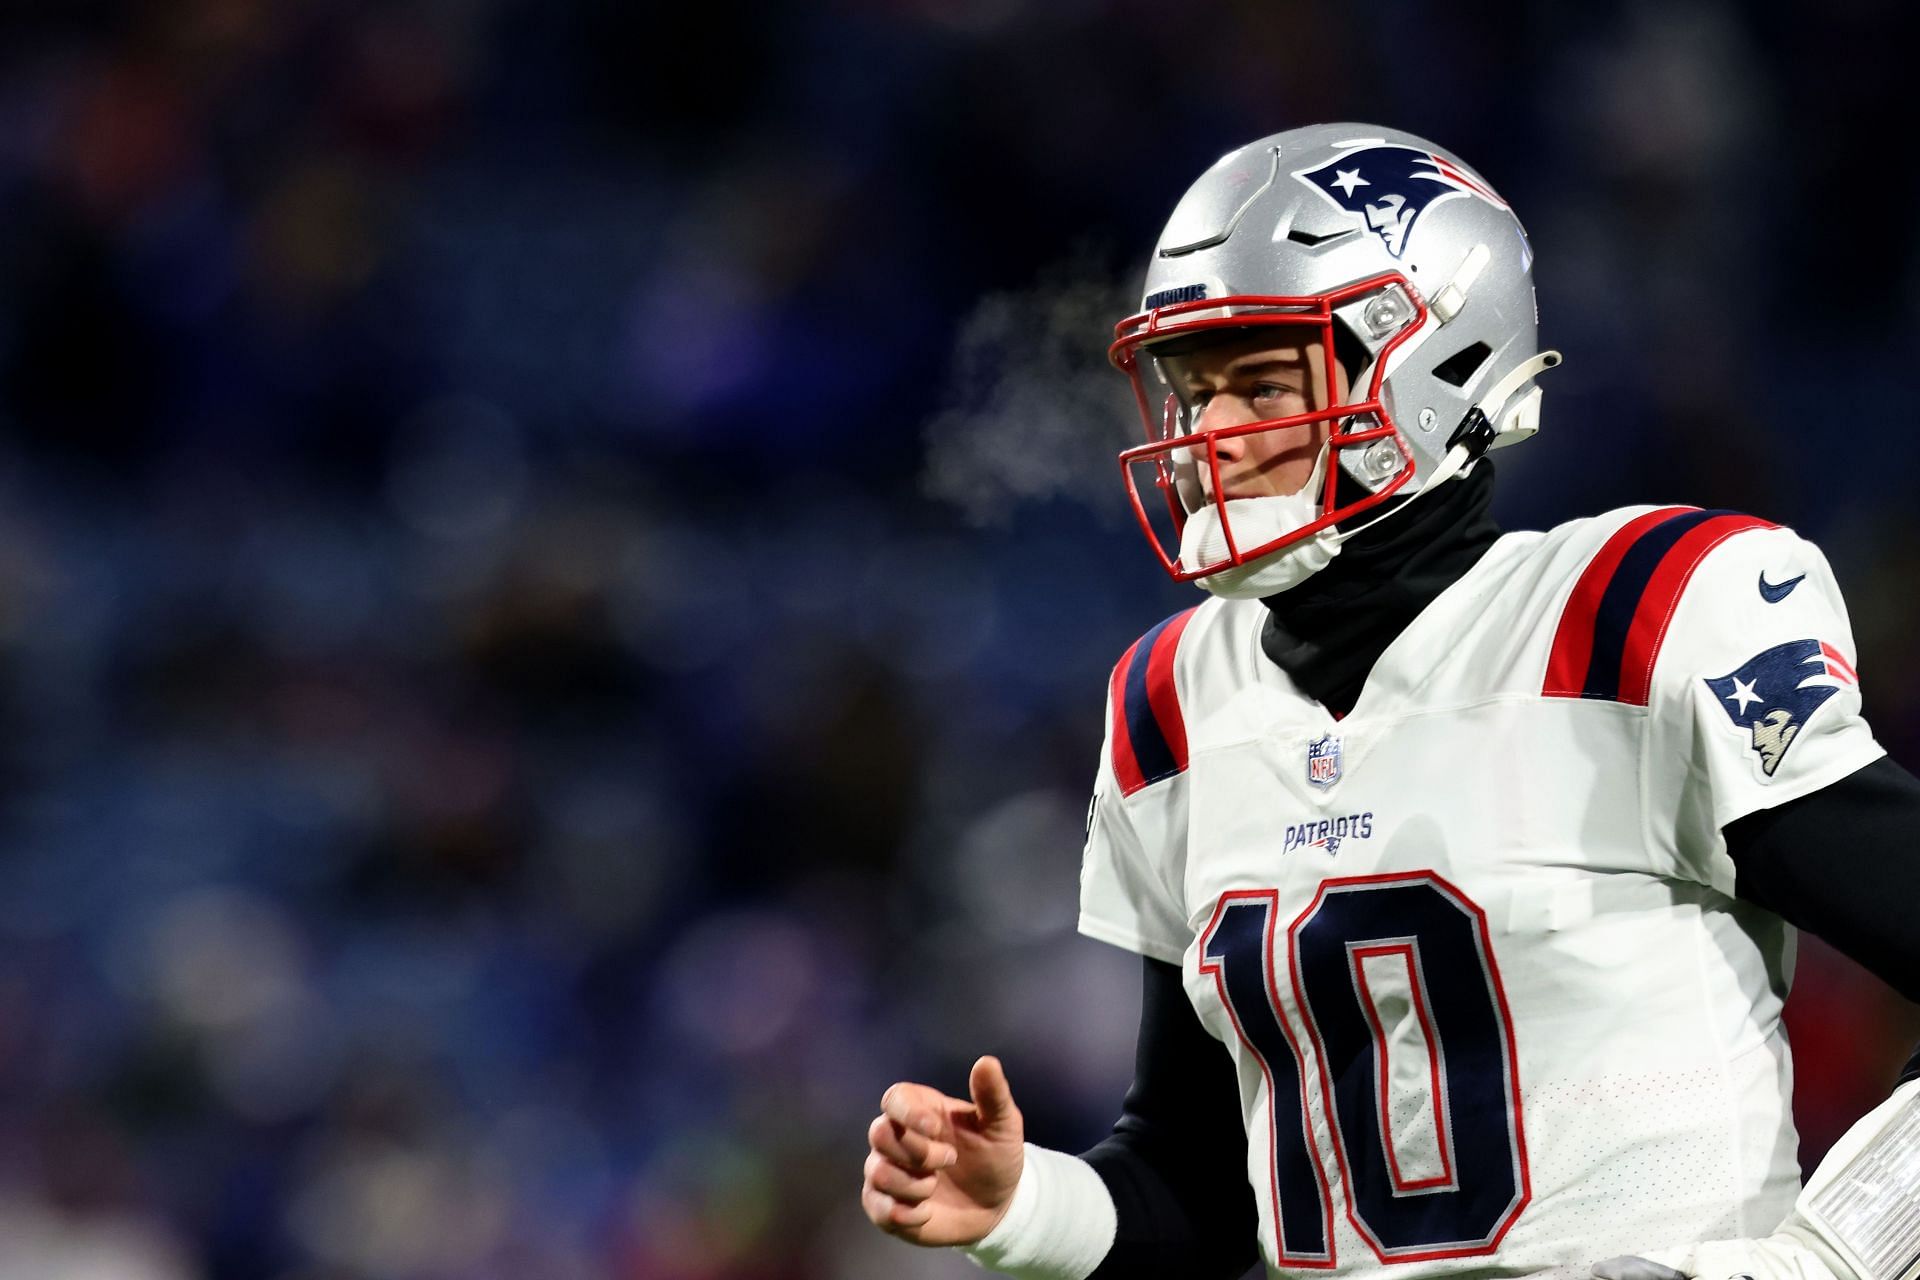 These 3 unlikely NFL MVP candidates could shock the world in 2022